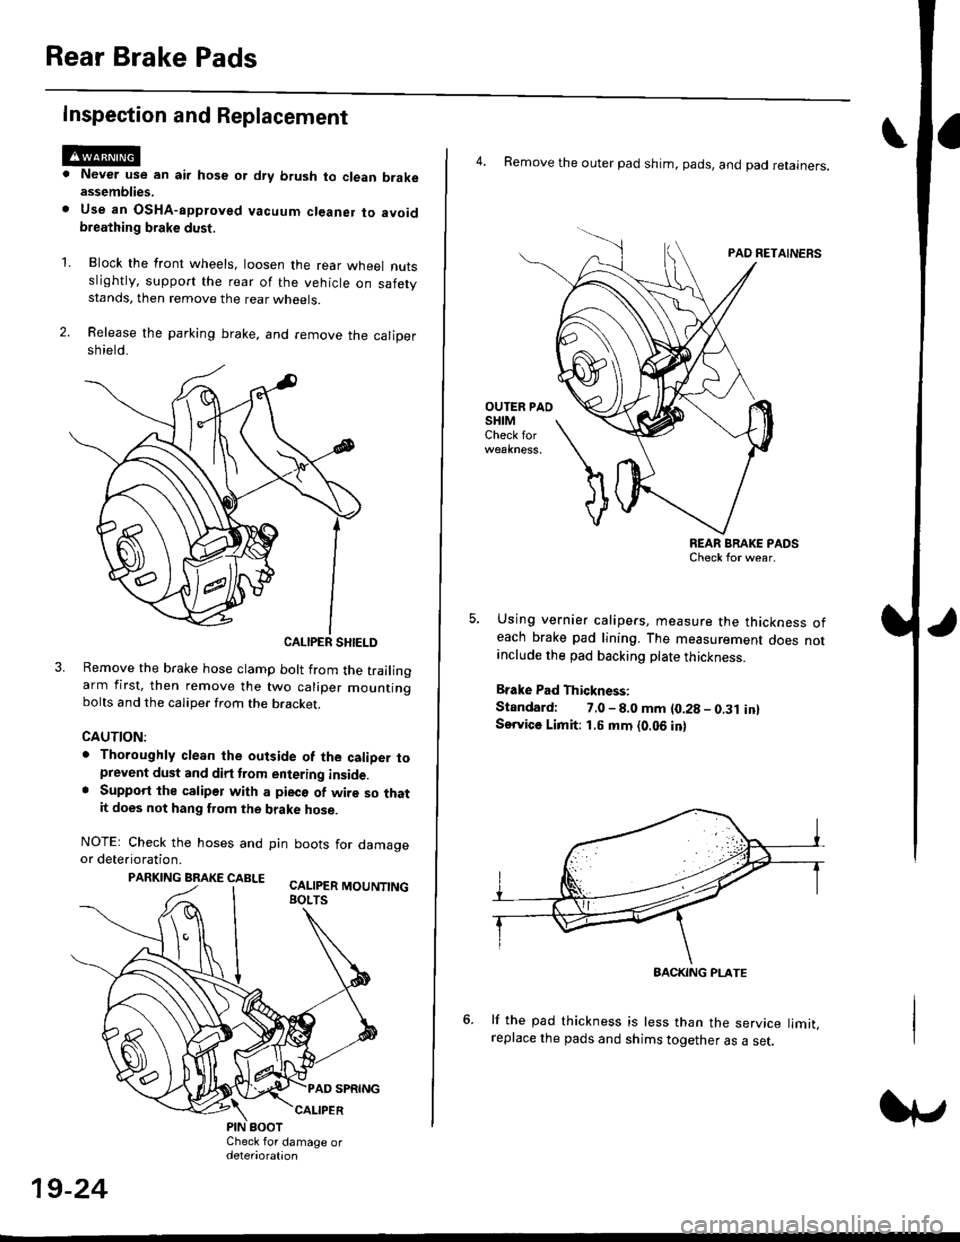 HONDA CIVIC 2000 6.G Workshop Manual Rear Brake Pads
Inspection and Replacement
Never use an air hose or dry brush to clean brakeassemblies.
Use an OsHA-apptoved vacuum cl€aner to avoidbreathing brake dust,
Block the front wheels, loos